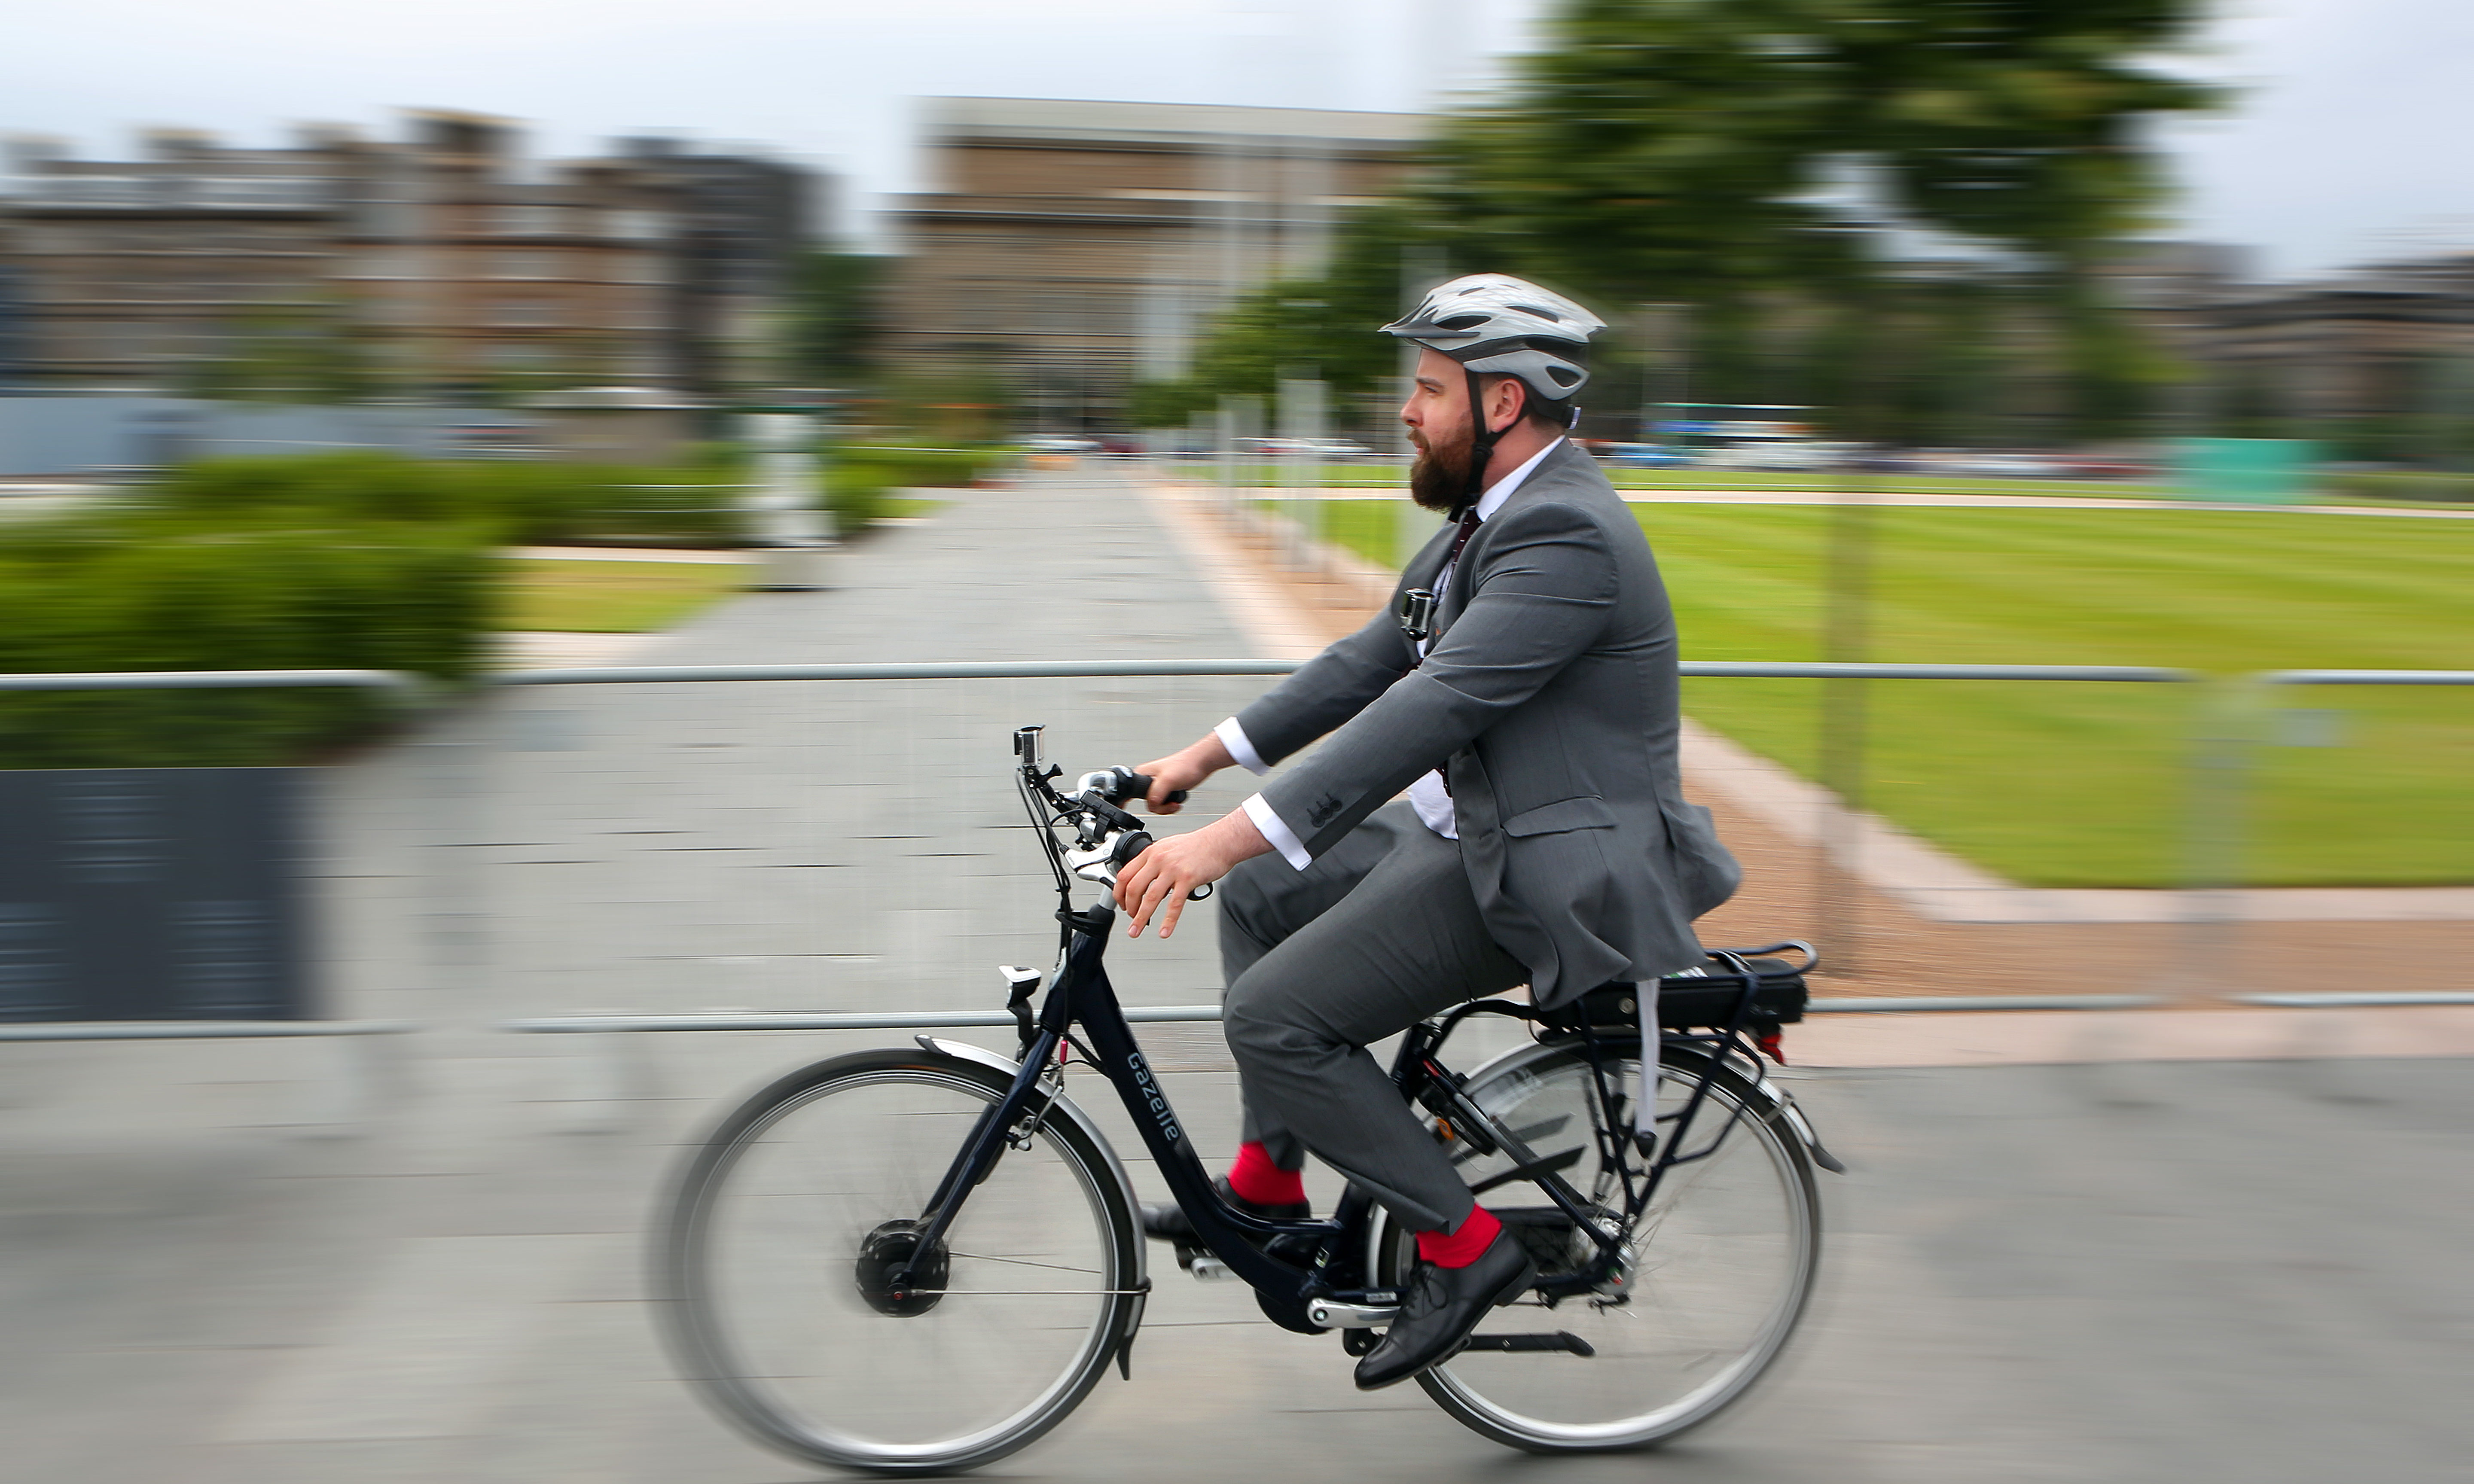 The scheme may see more suit-clad commuters travel by bike in the city